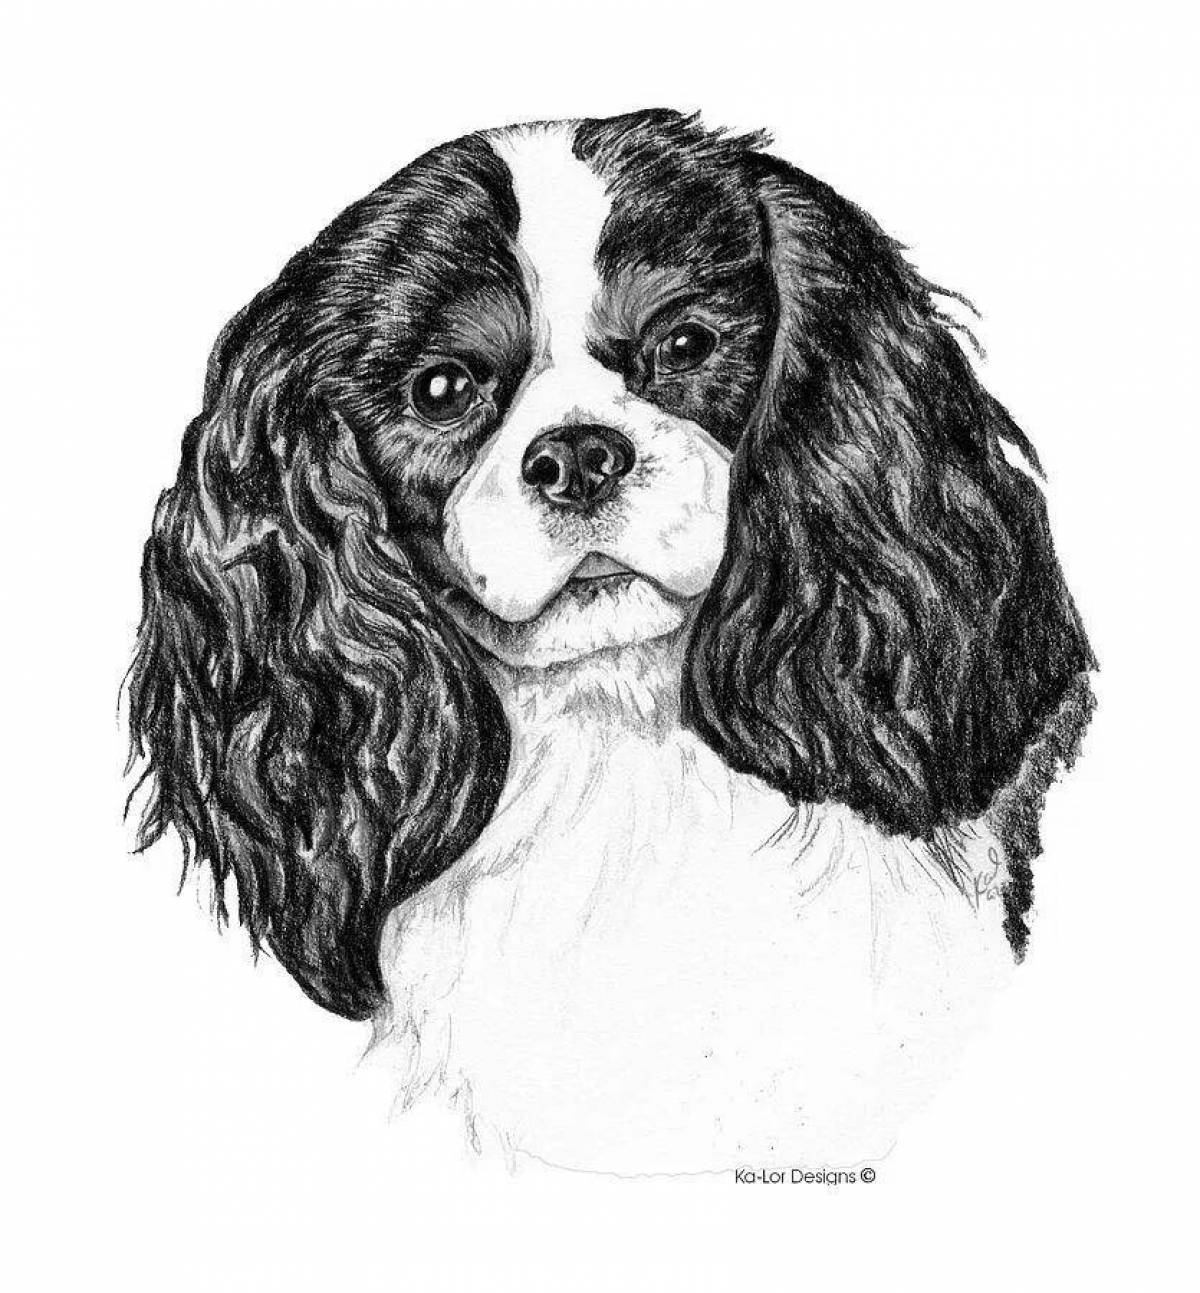 Great coloring page spaniel cavalier king charles